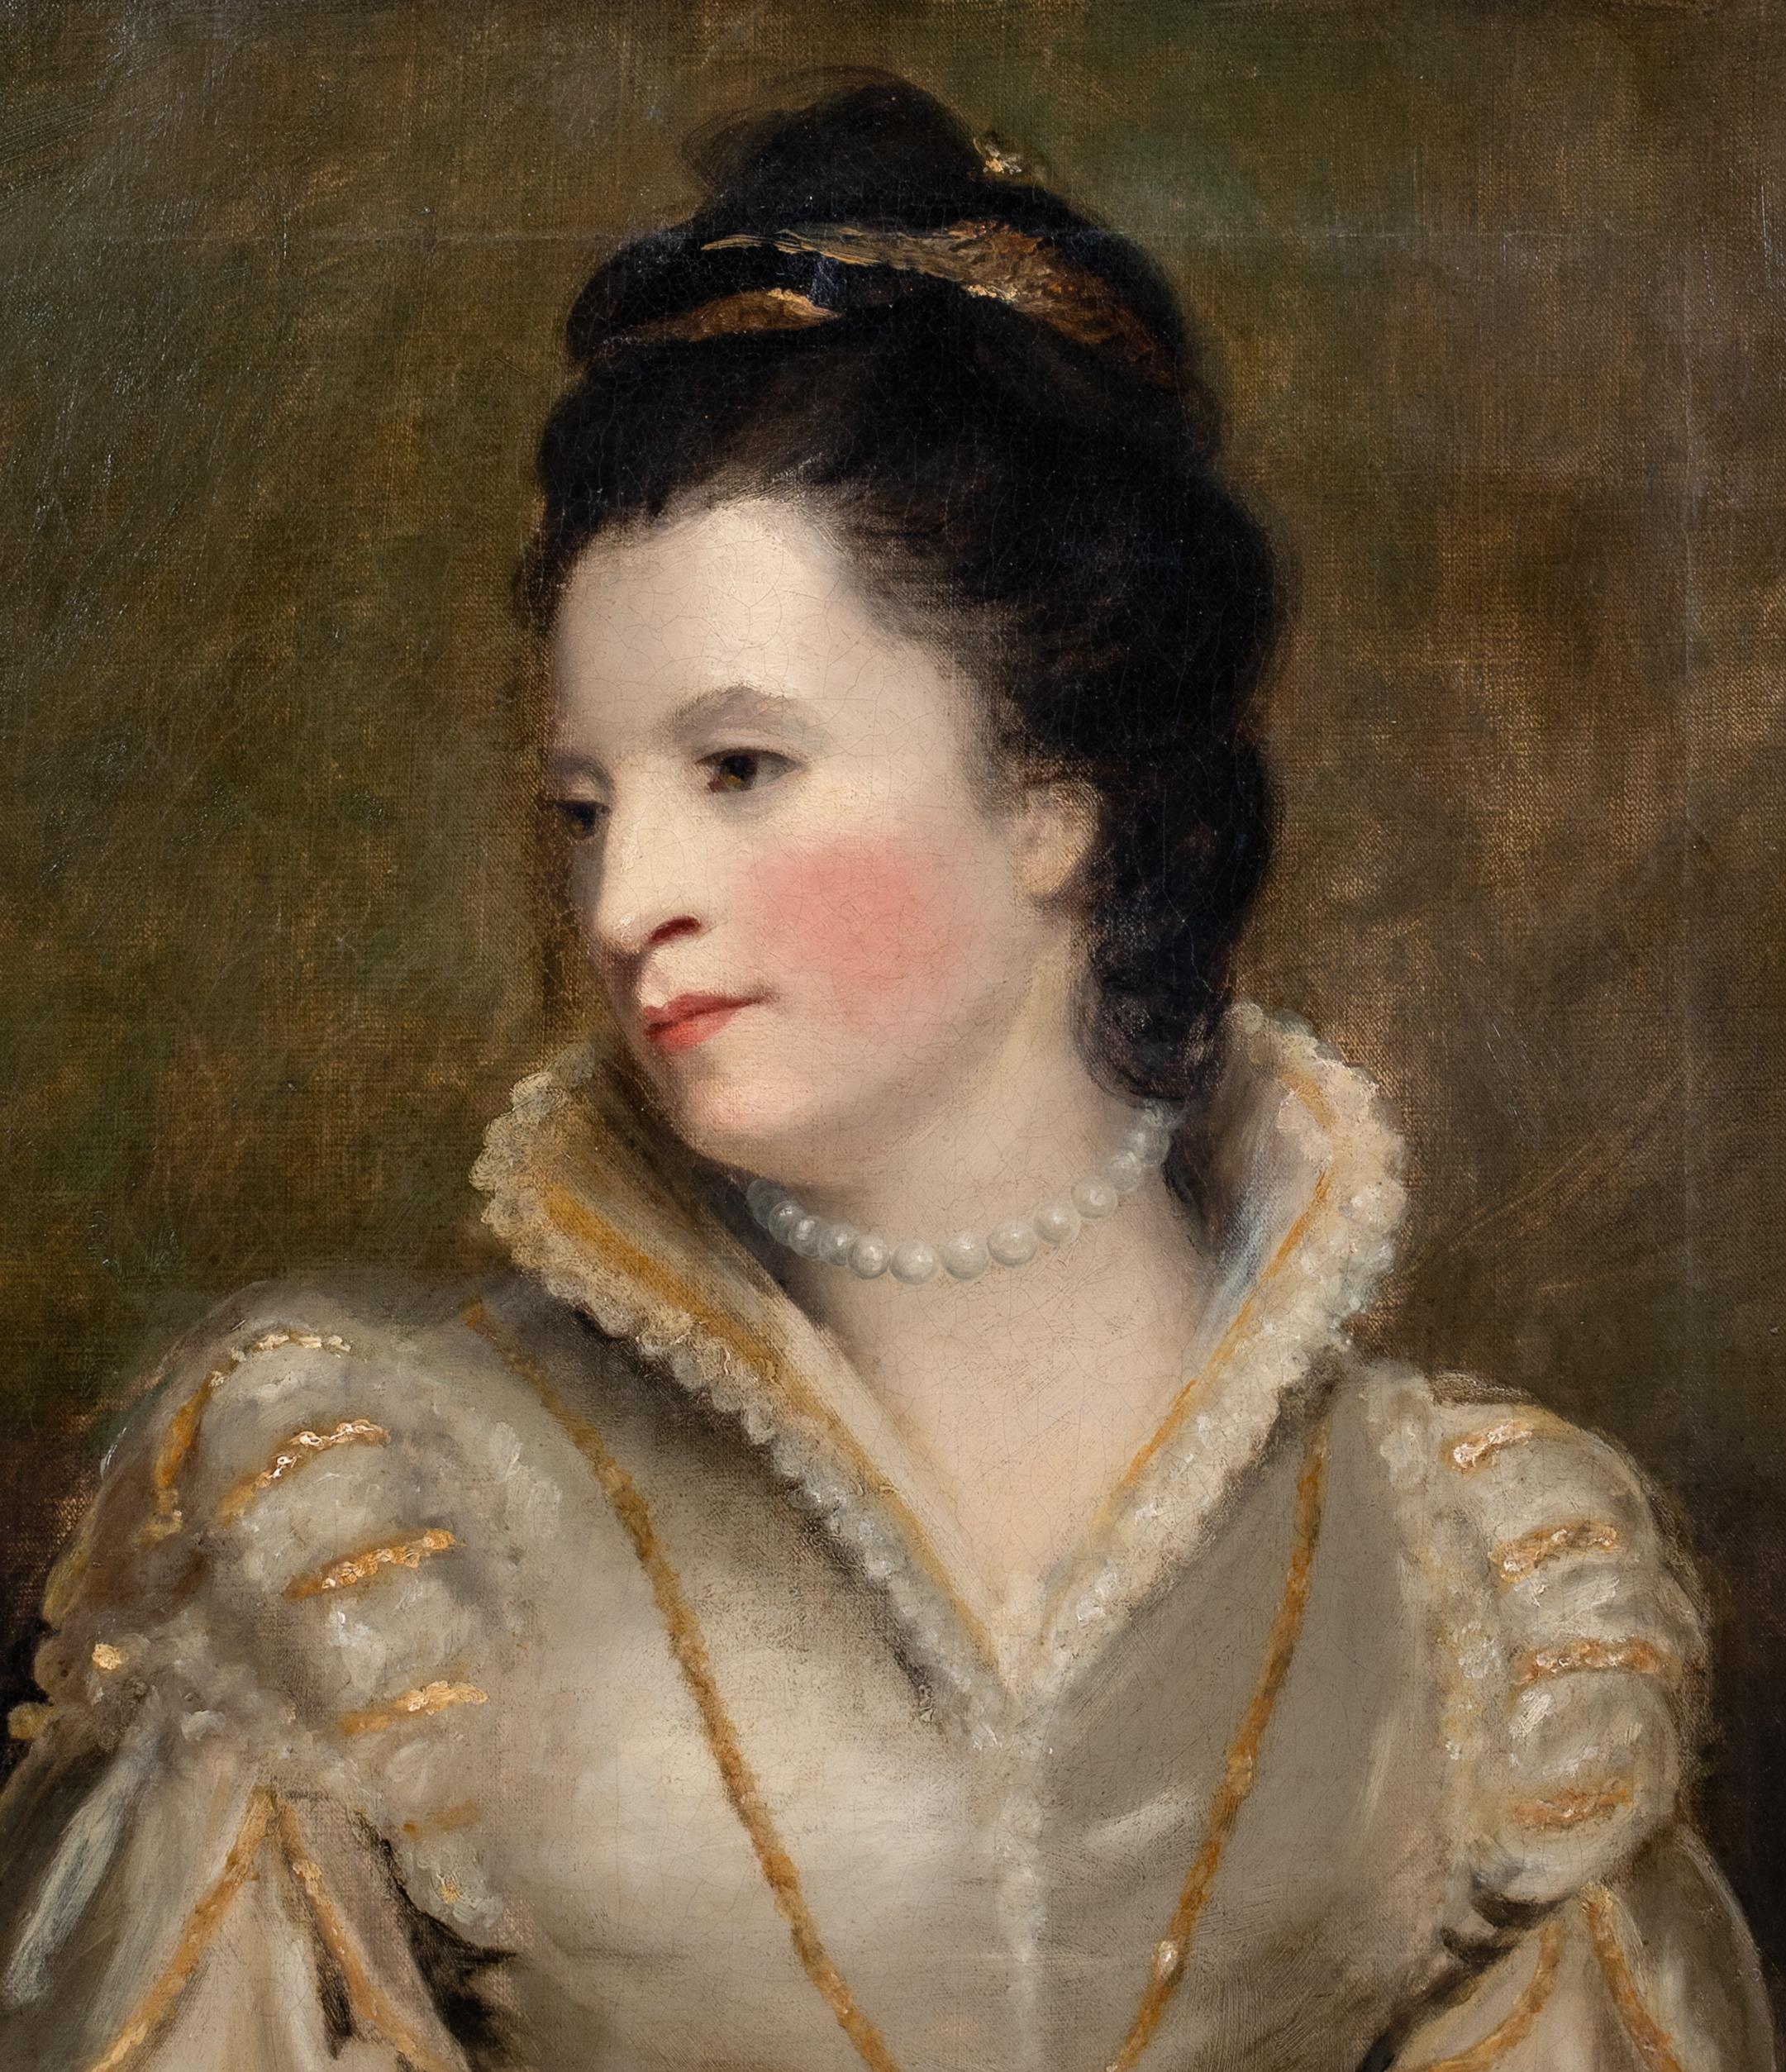 Portrait Of Anne Dashwood (Stewart) Countess of Galloway (1743-1830)

circle of SIR JOSHUA REYNOLDS (1723-1792)

Large 18th Century portrait of Anne Dashwood, Countess of Galloway, later wife of John Stewart, 7th Earl of Galloway, wearing